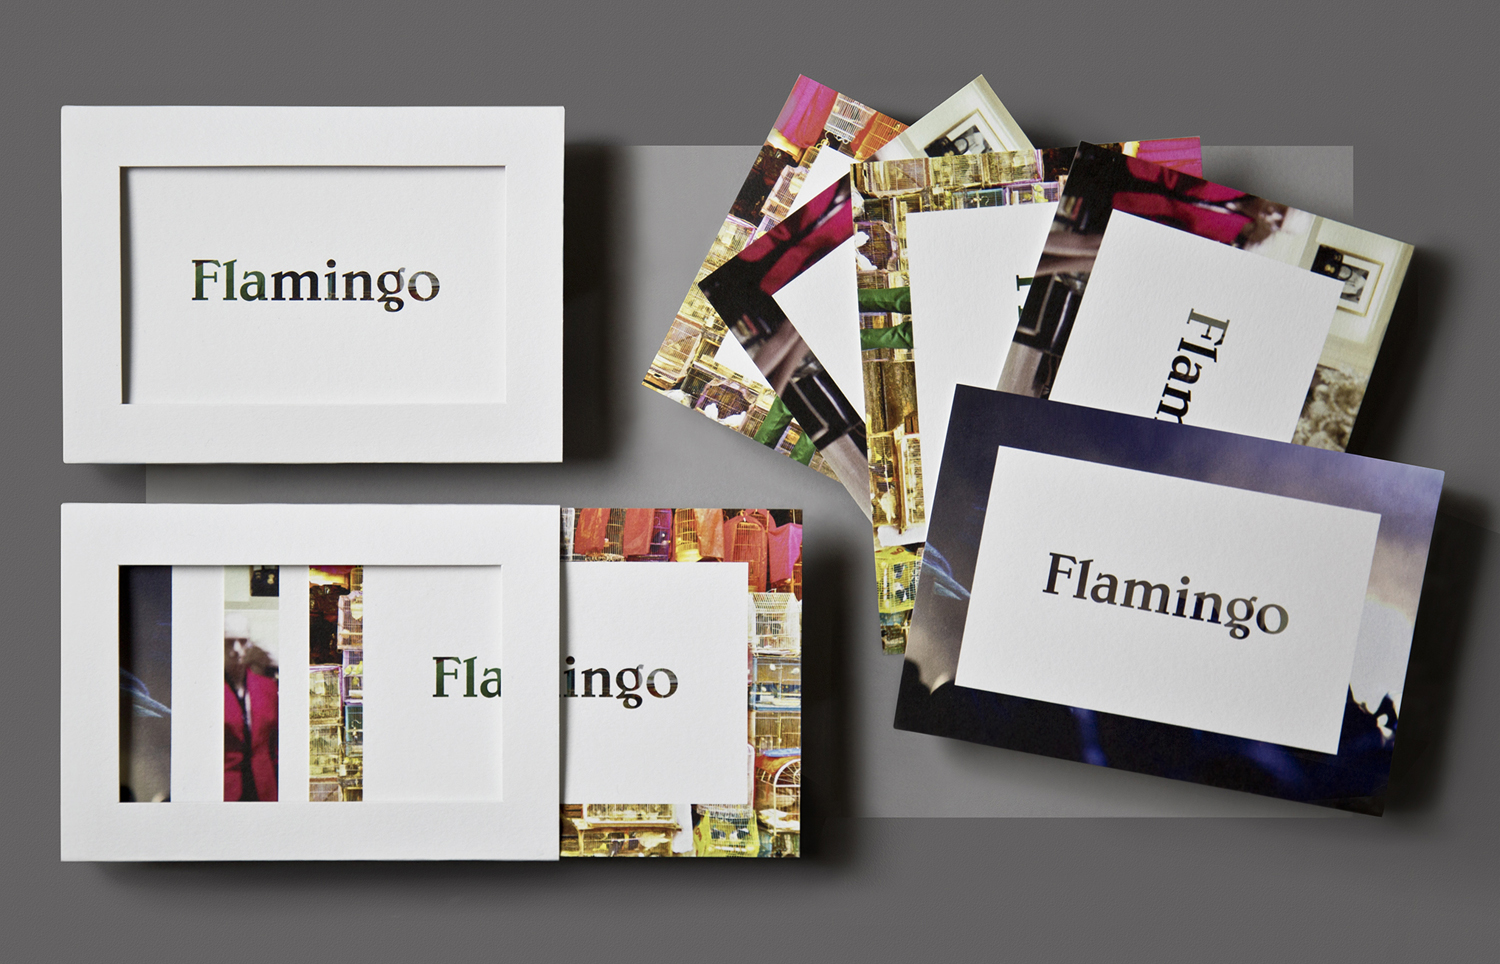 Brand Identity and post cards for Flamingo by Bibliotheque, United Kingdom